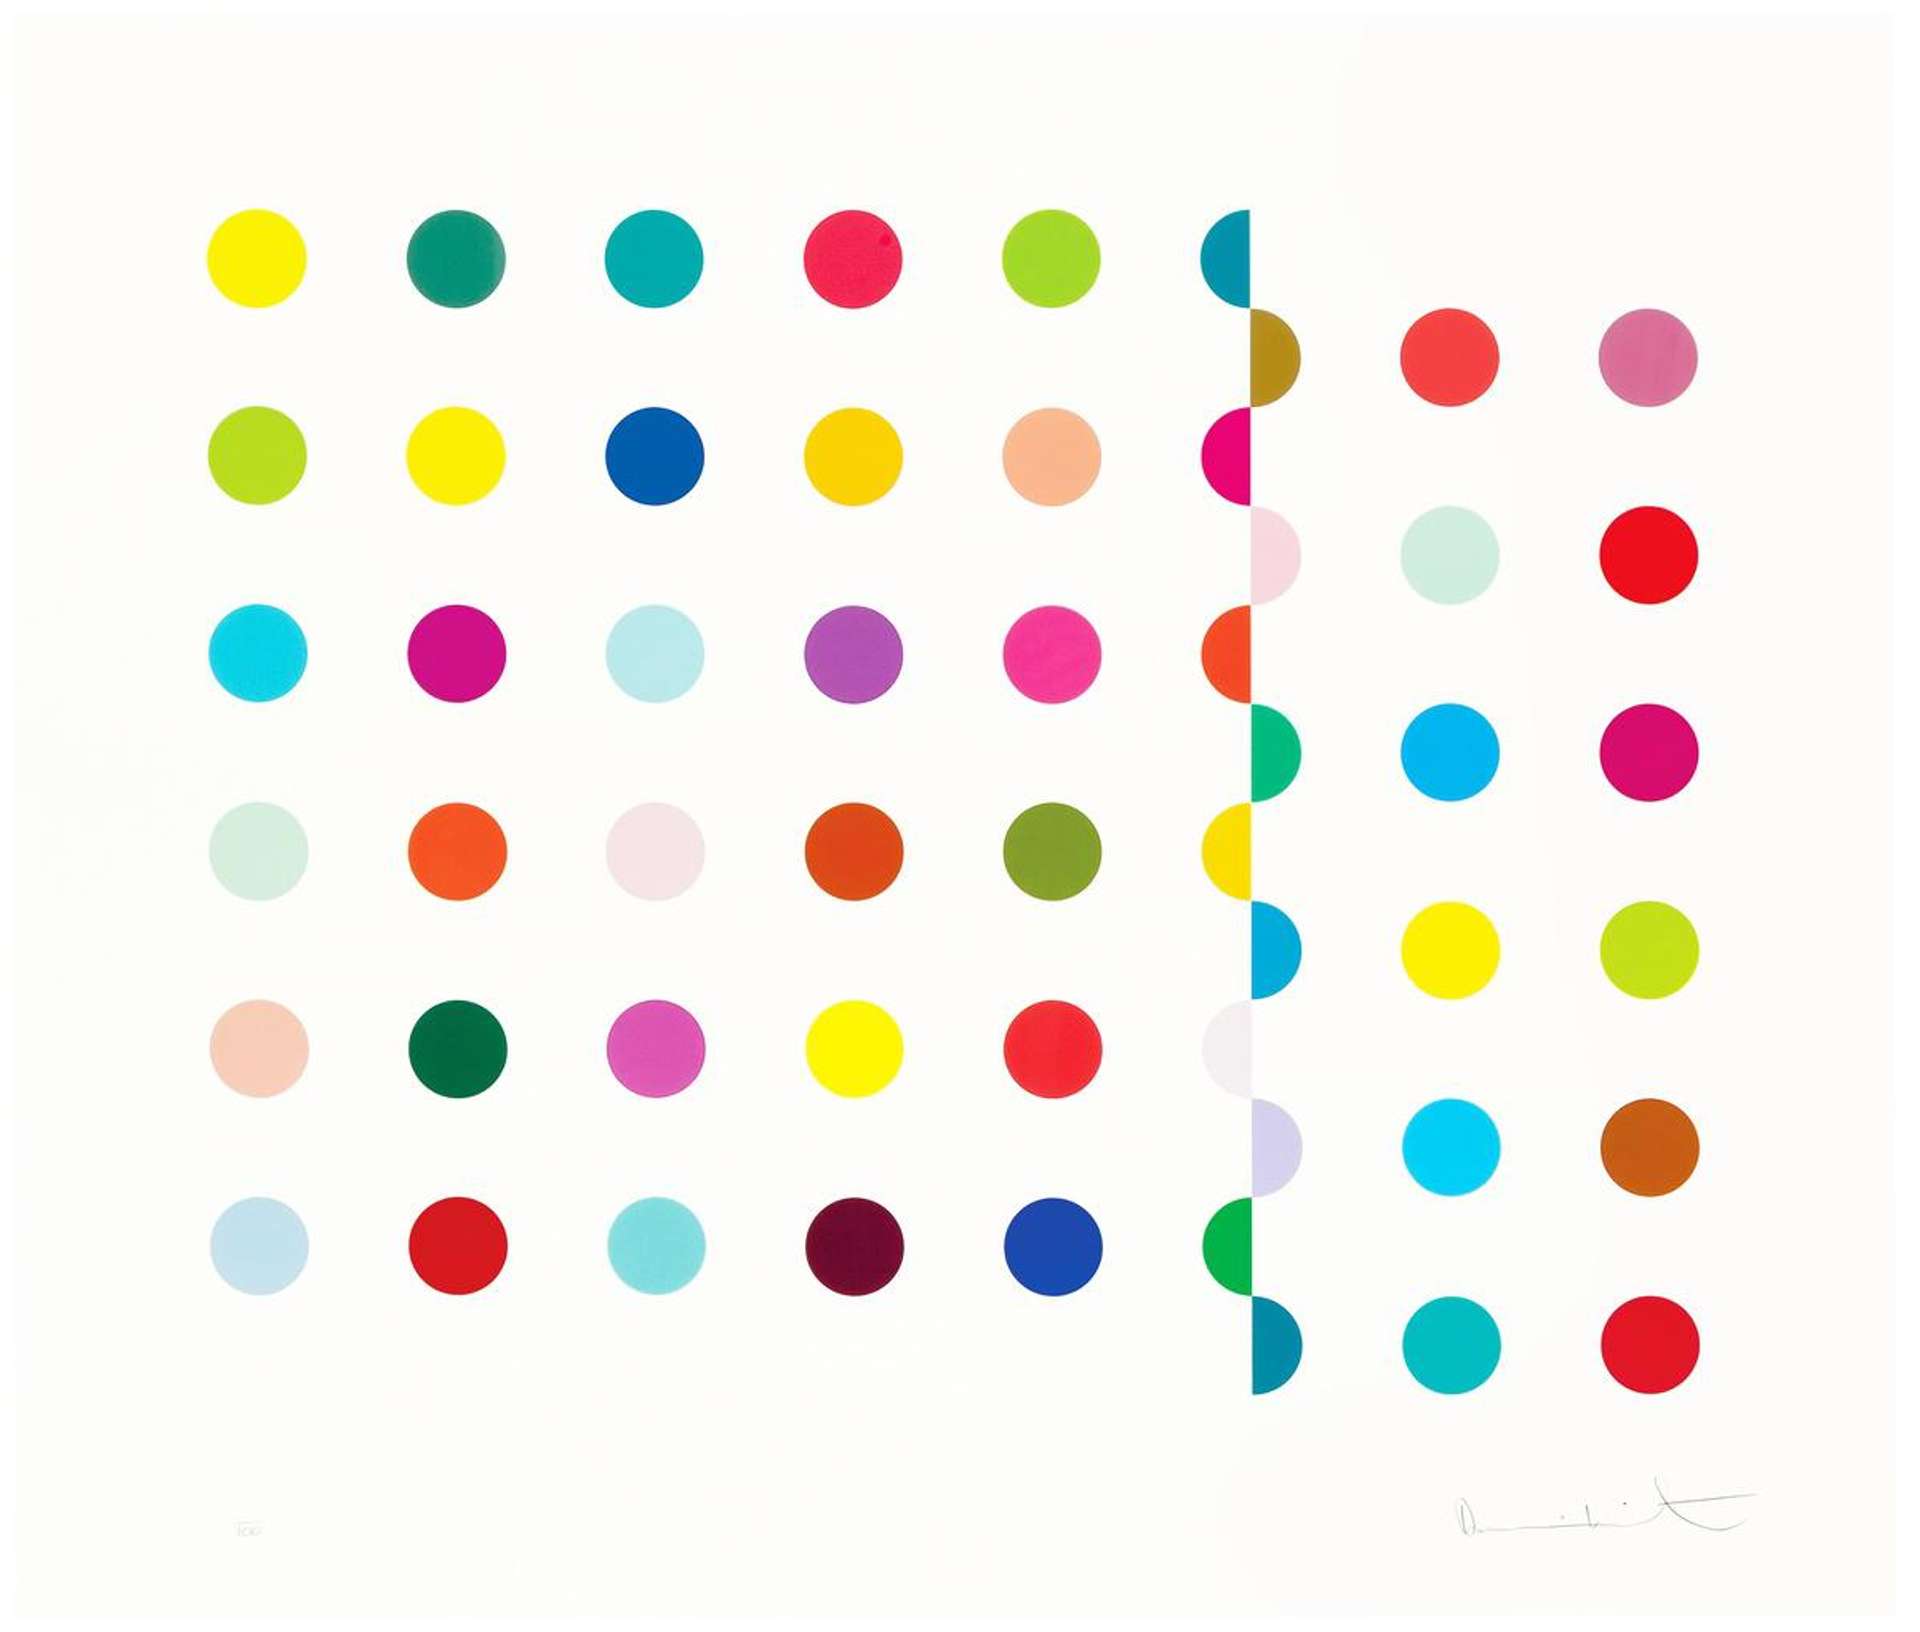 An image of the artwork Lactoylglutathione by Damien Hirst. It consists of several orderly rows of colourful dots, with only one of the rows mismatched. This gives the impression of a collage of dot paintings.